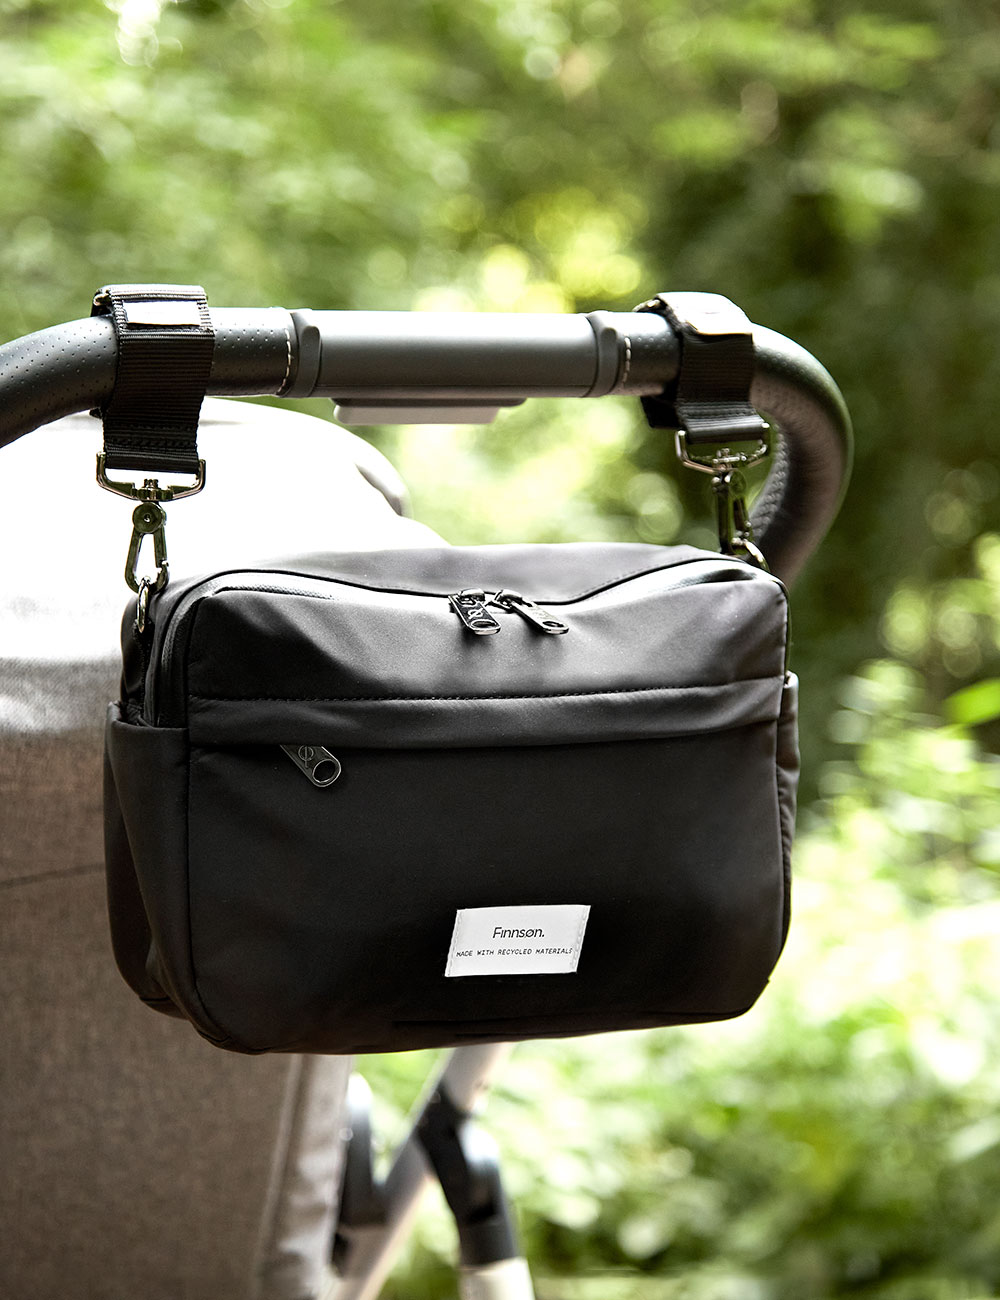 A black cross-body bag hanging from the handle of a pram